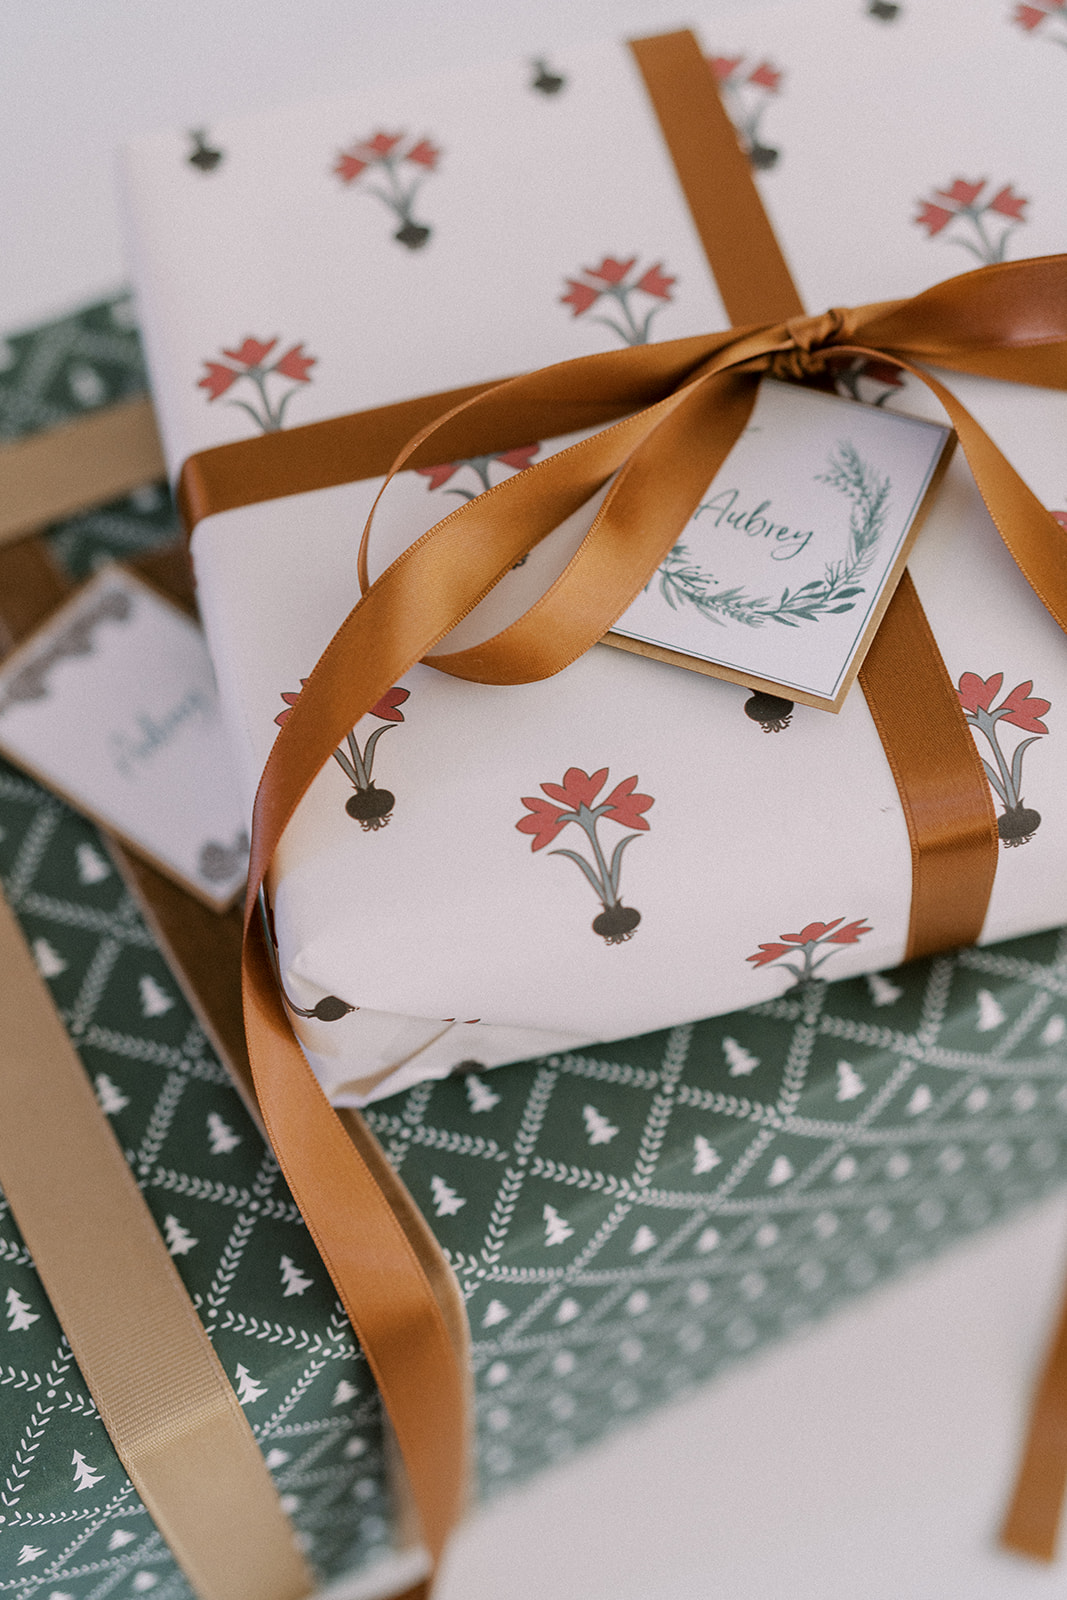 FREE Printable Christmas Gift Tags That Will Add Personality To Your Gifts